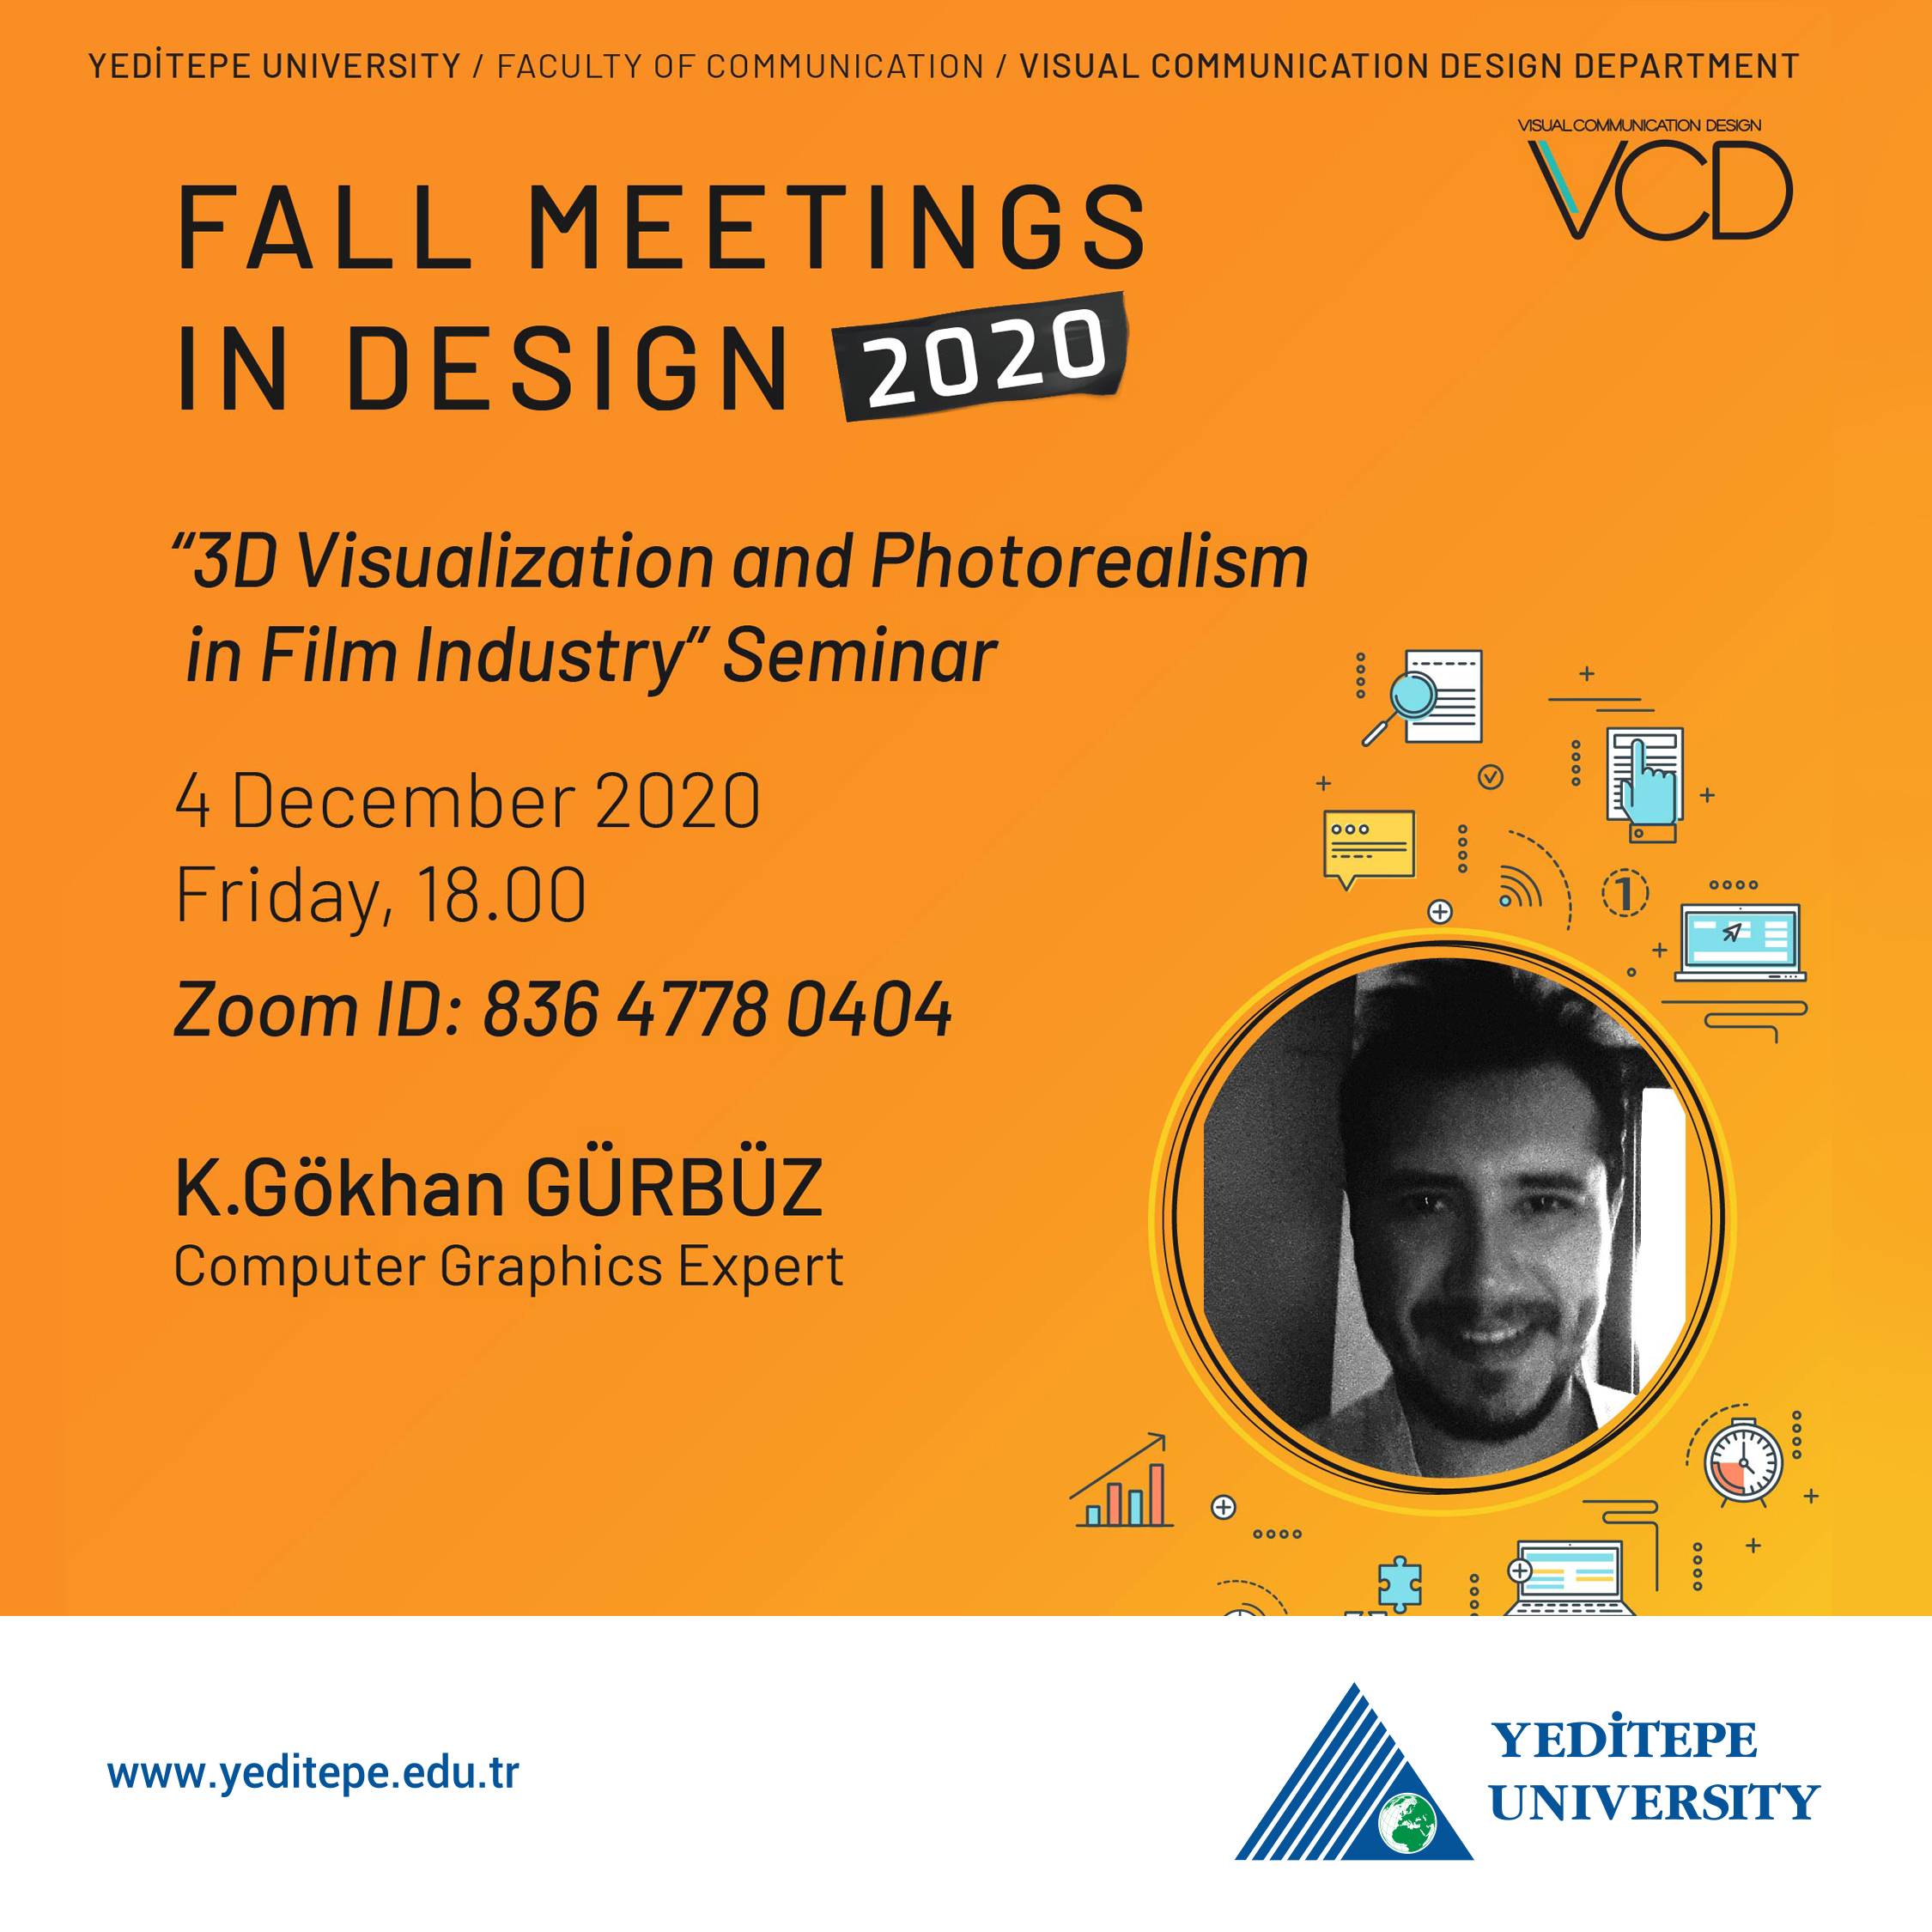 Fall Meetings in Design 2020 - 3D Visualization and Photorealism in Film Industry